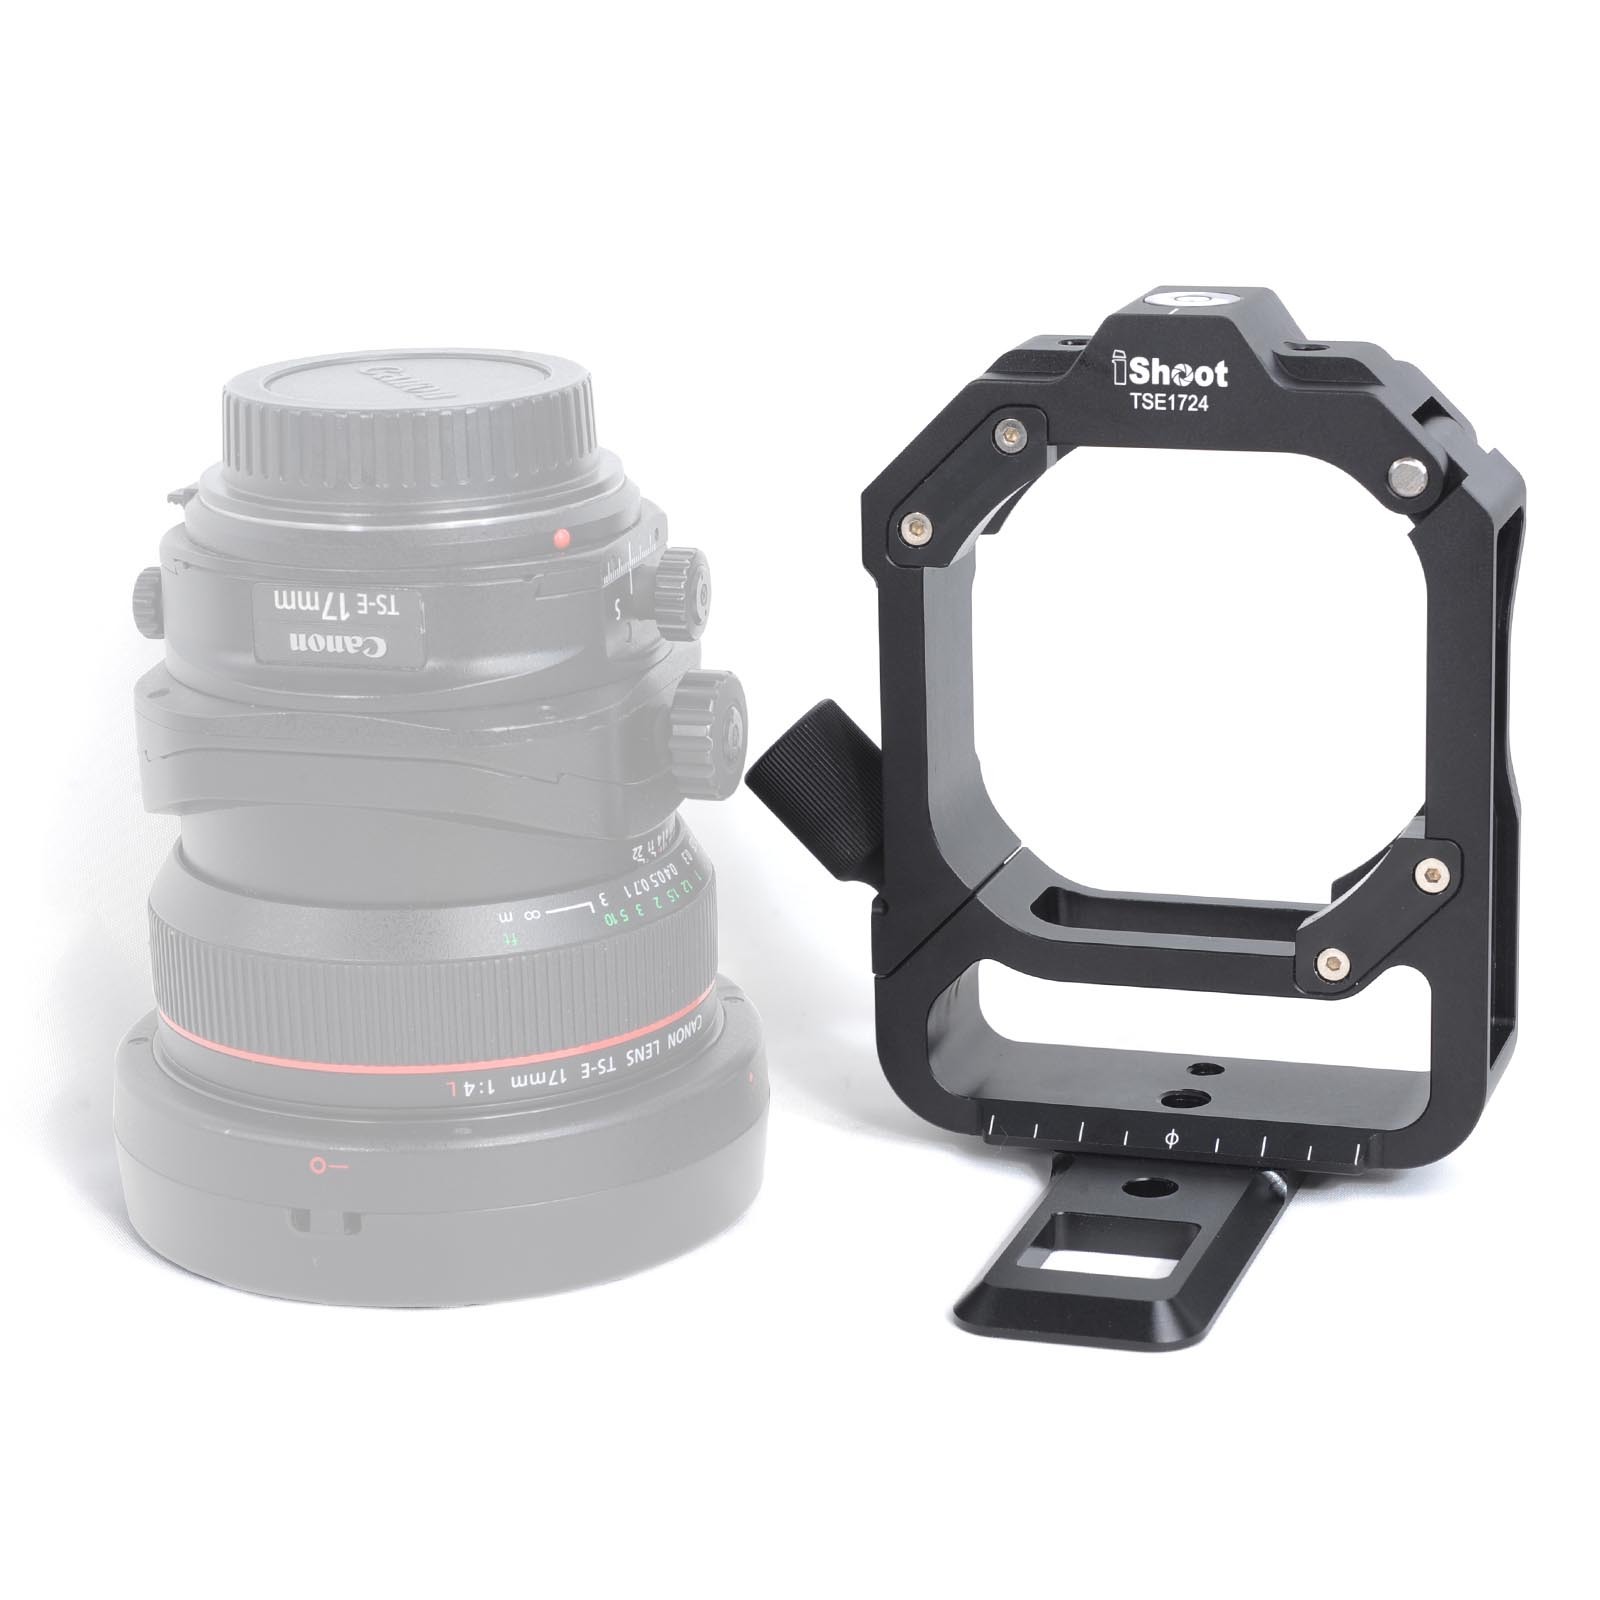 iShoot Tripod Mount Ring Lens Collar for Canon TS-E 17mm f/4L Tilt-Shift Lens 3553B002 & Canon TS-E 24mm f/3.5L II Tilt-Shift Lens 3552B002 with Quick Release Plate for Arca-Swiss Fit Tripod Ballhead